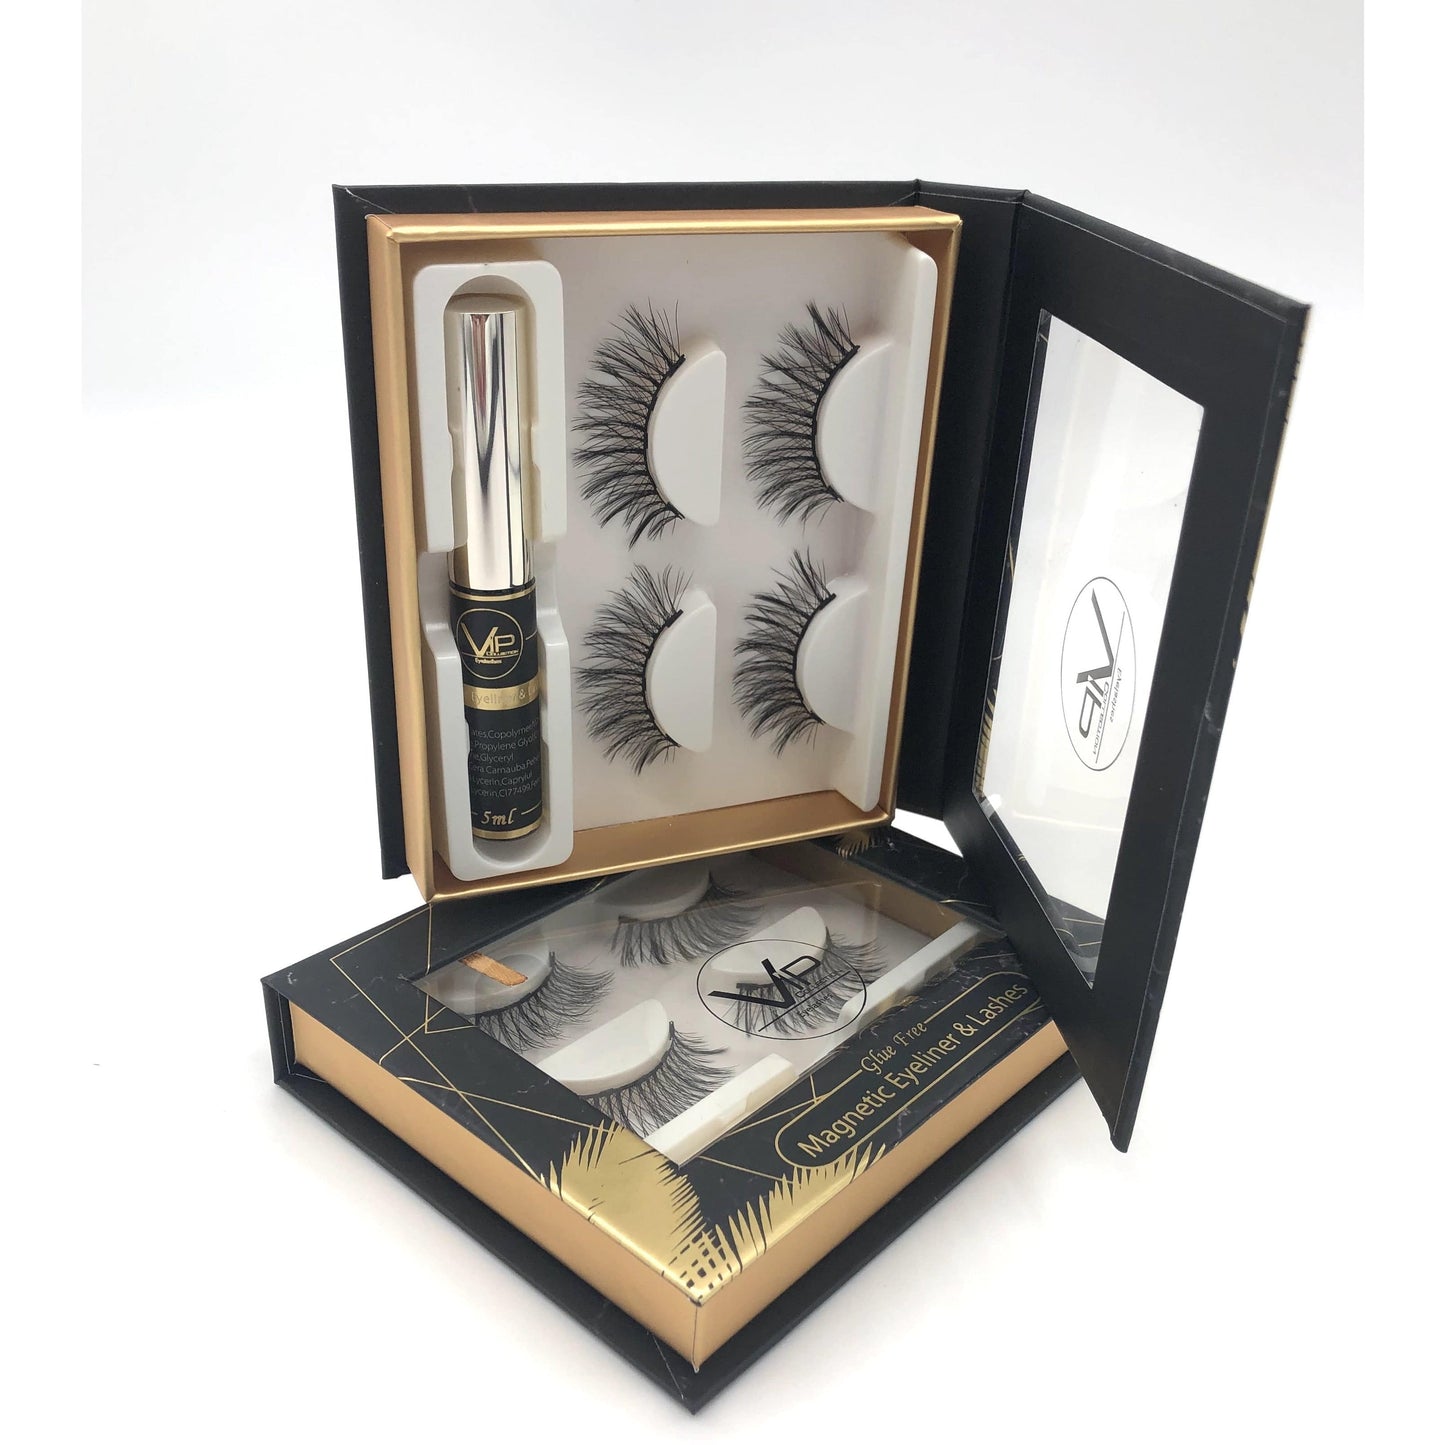 VIP Magnetic Lashes with Magnetic Eyeliner  - 2 pairs - VIP Extensions